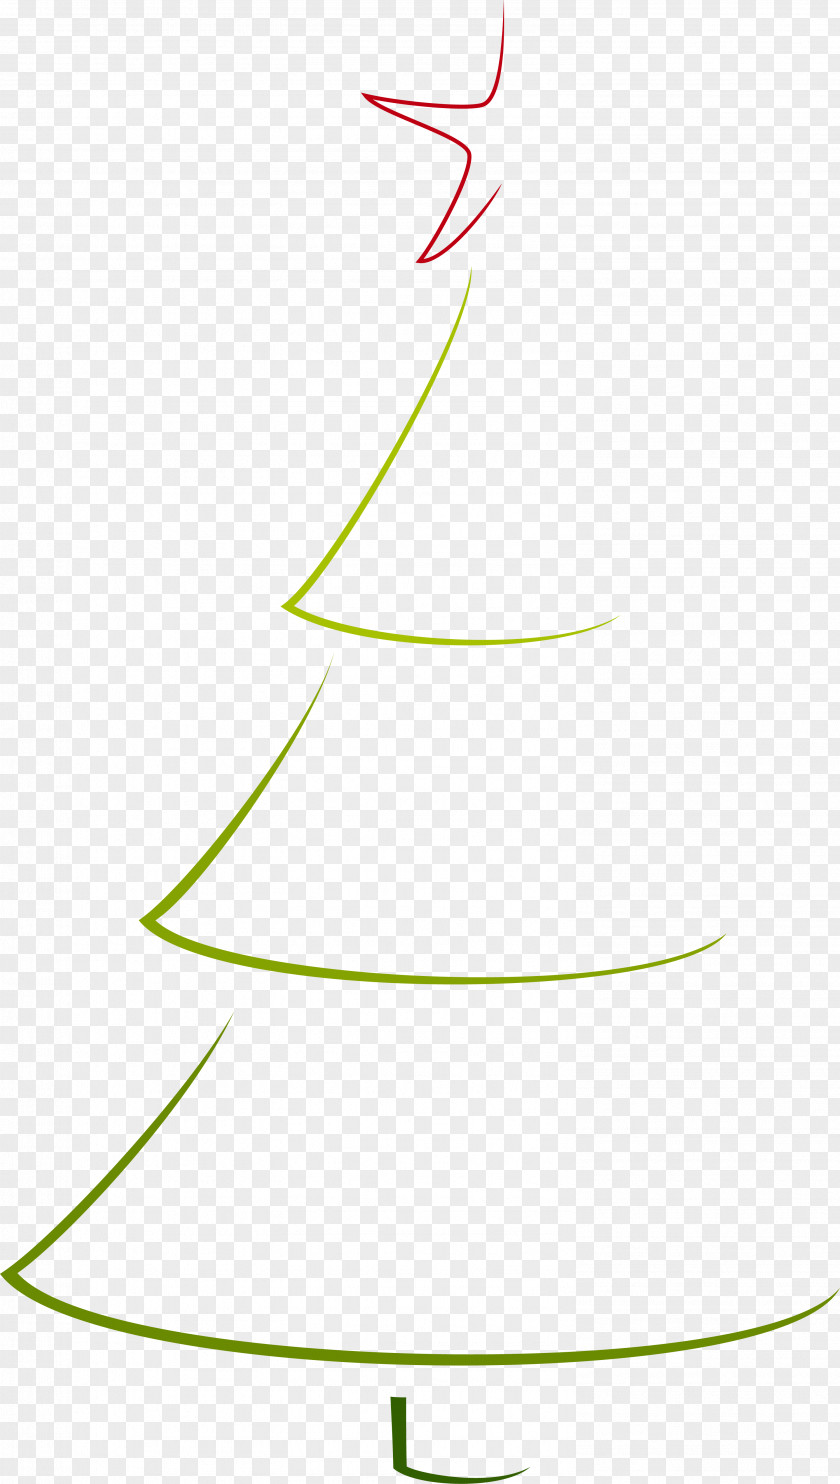 Simple Green Christmas Tree Clip Art PNG